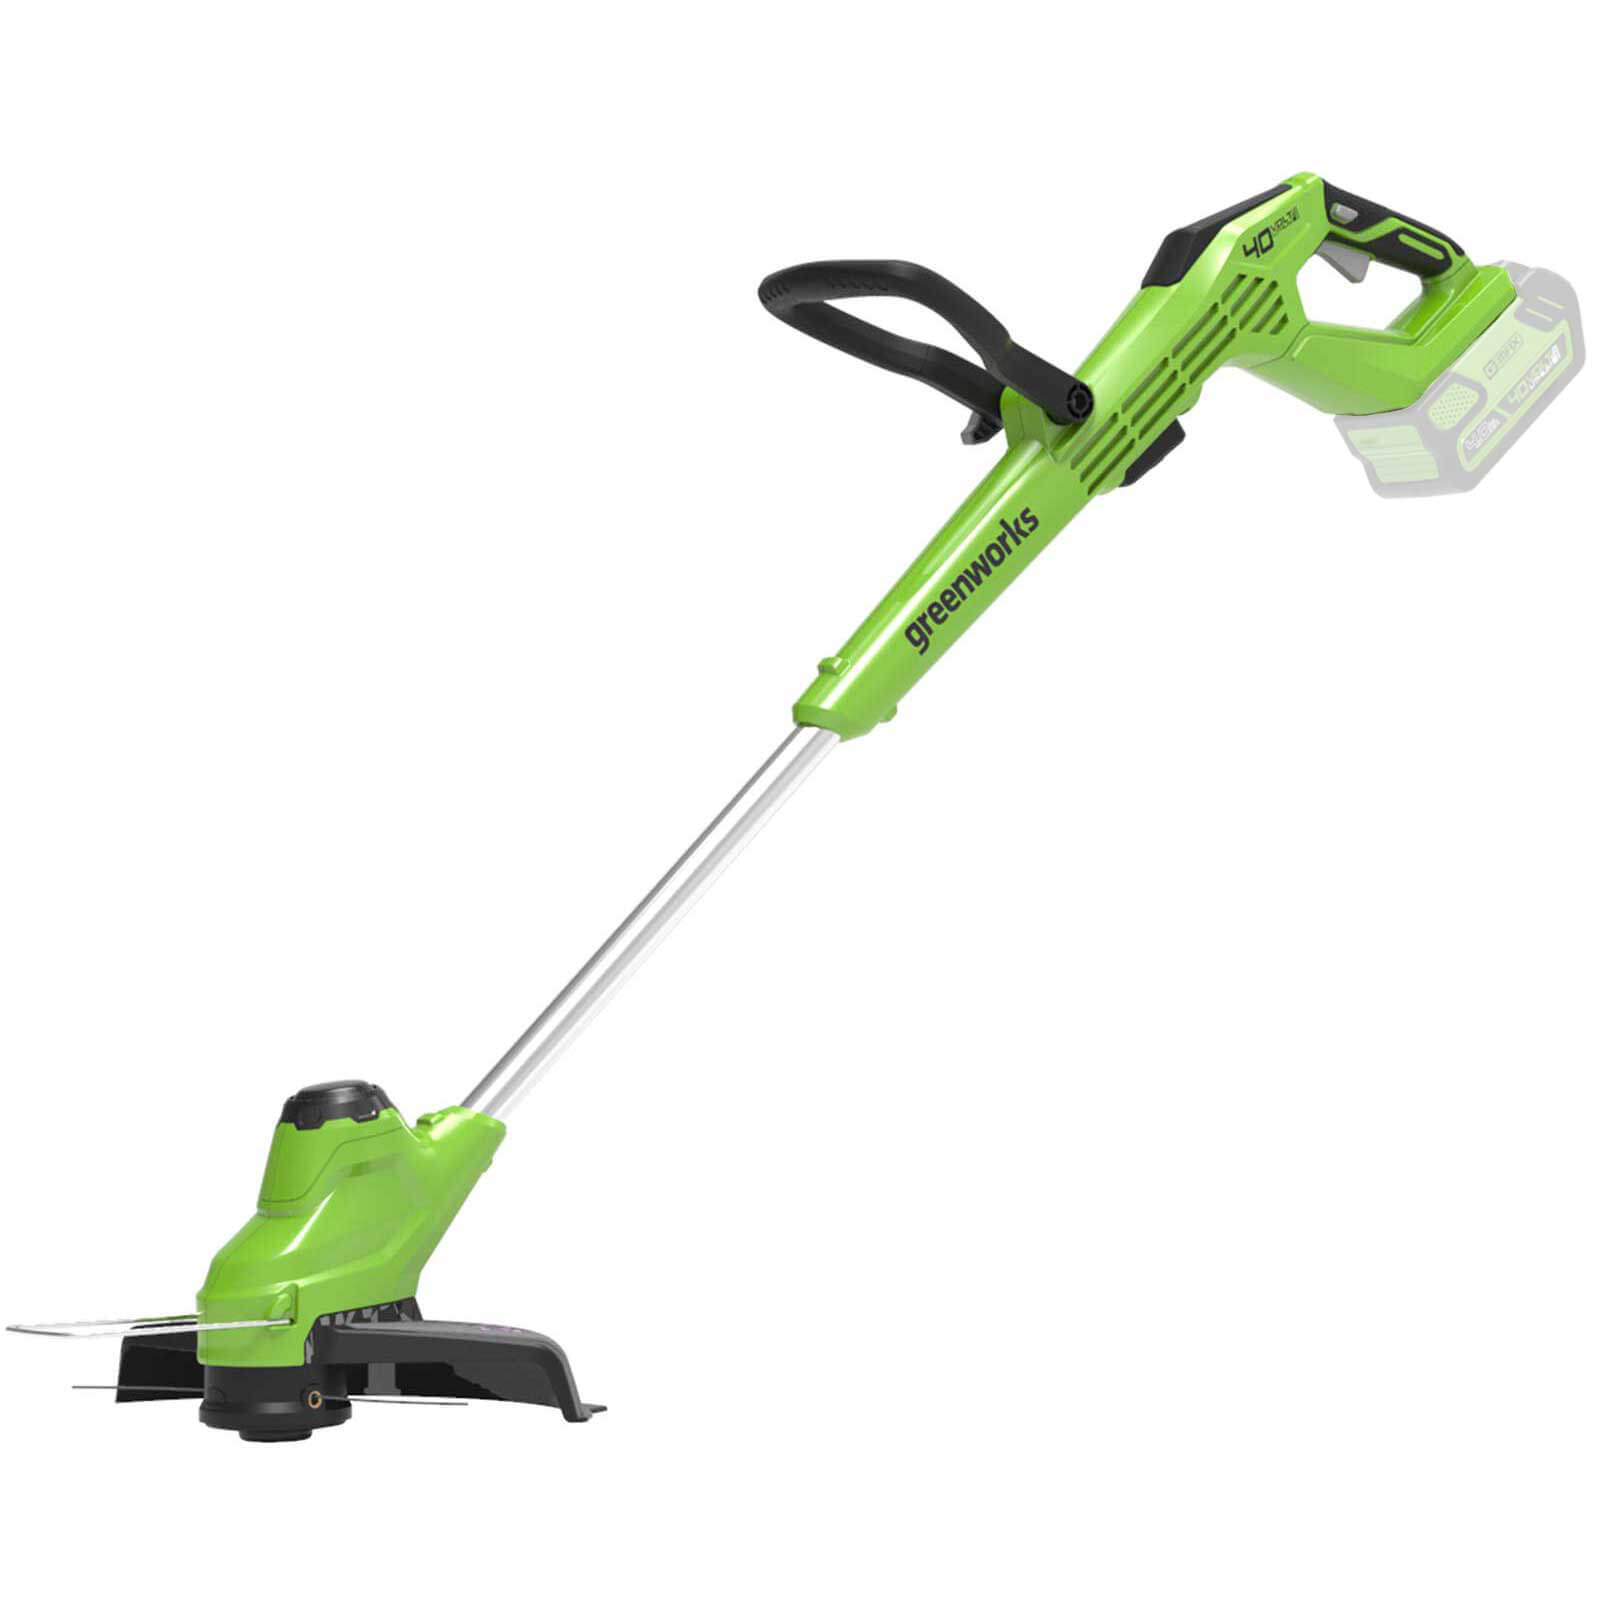 Greenworks G40T5 40v Cordless Grass Trimmer and Edger 300mm No Batteries No Charger